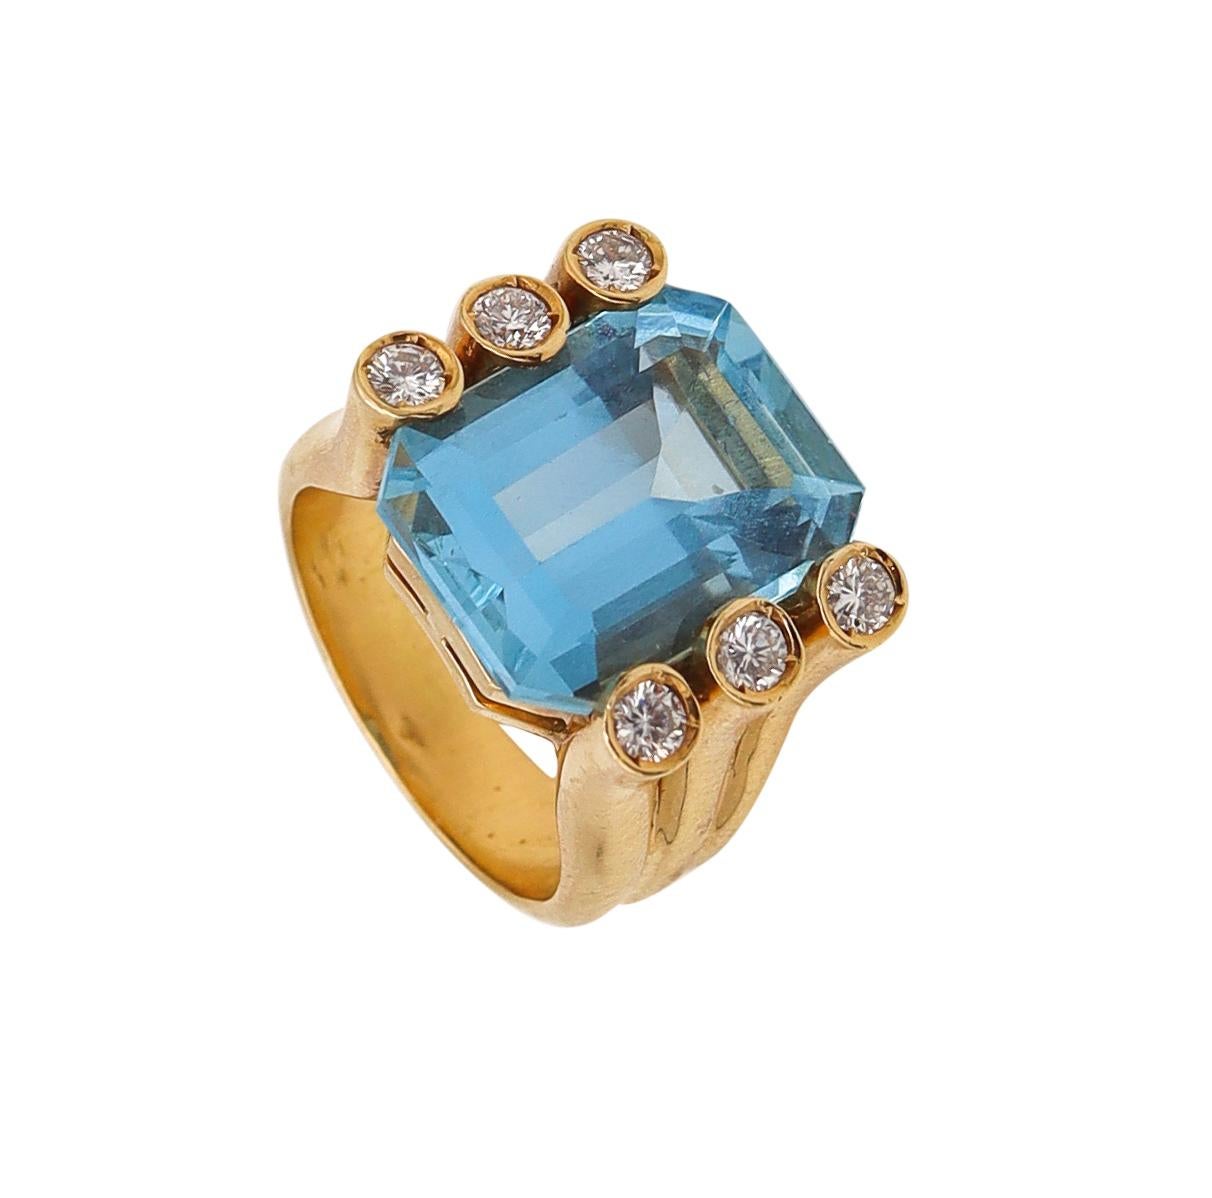 Cocktail Ring designed by Verdura.

Fabulous piece, created in Milano Italy by the jewelry house of Verdura. This cocktail ring was crafted in solid yellow gold of 18 karats, with high polished finish and embellished, with a great selection of